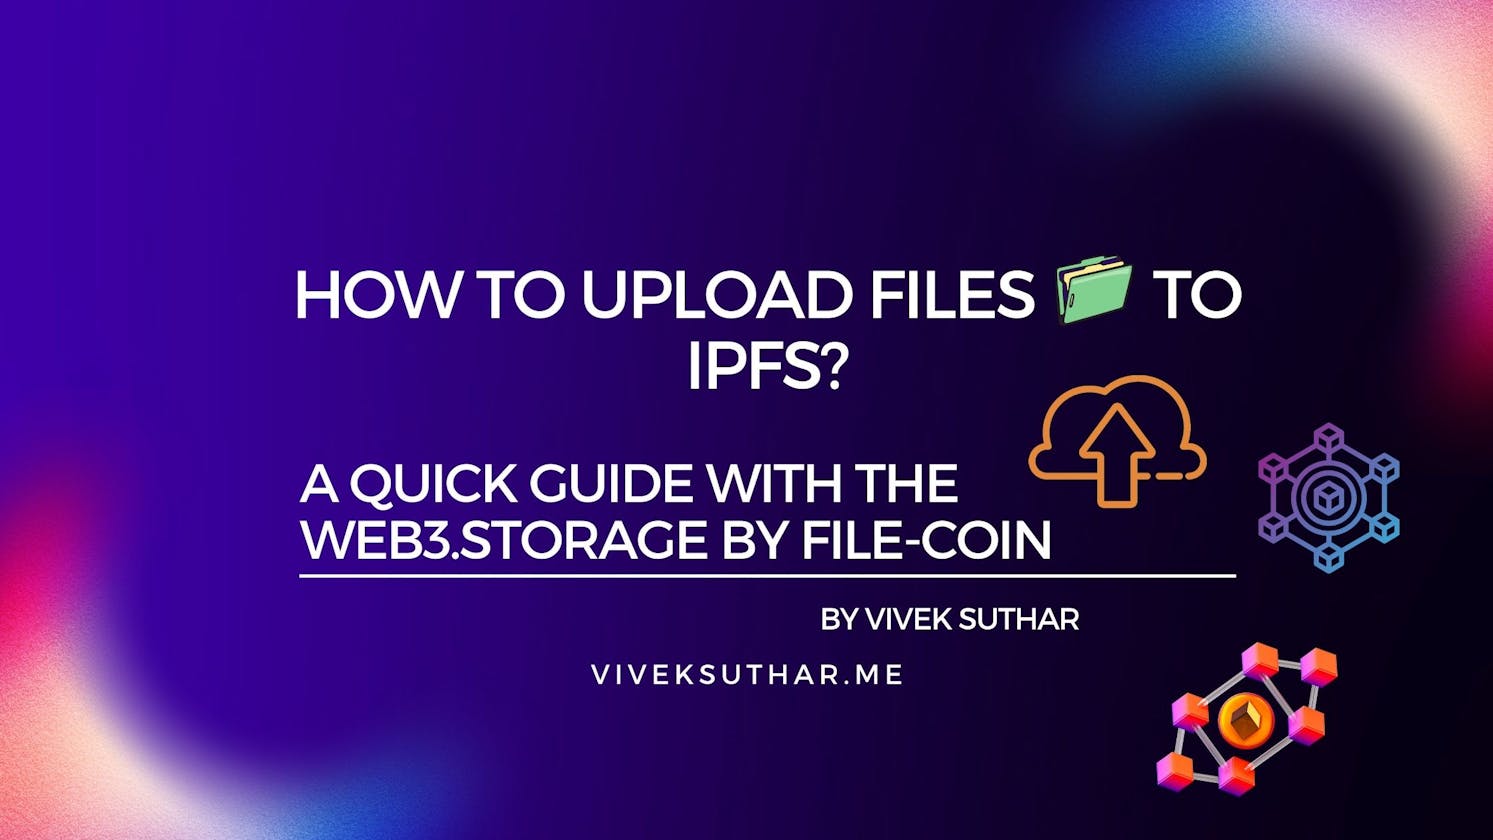 Upload your Files to IPFS: An Easy guide